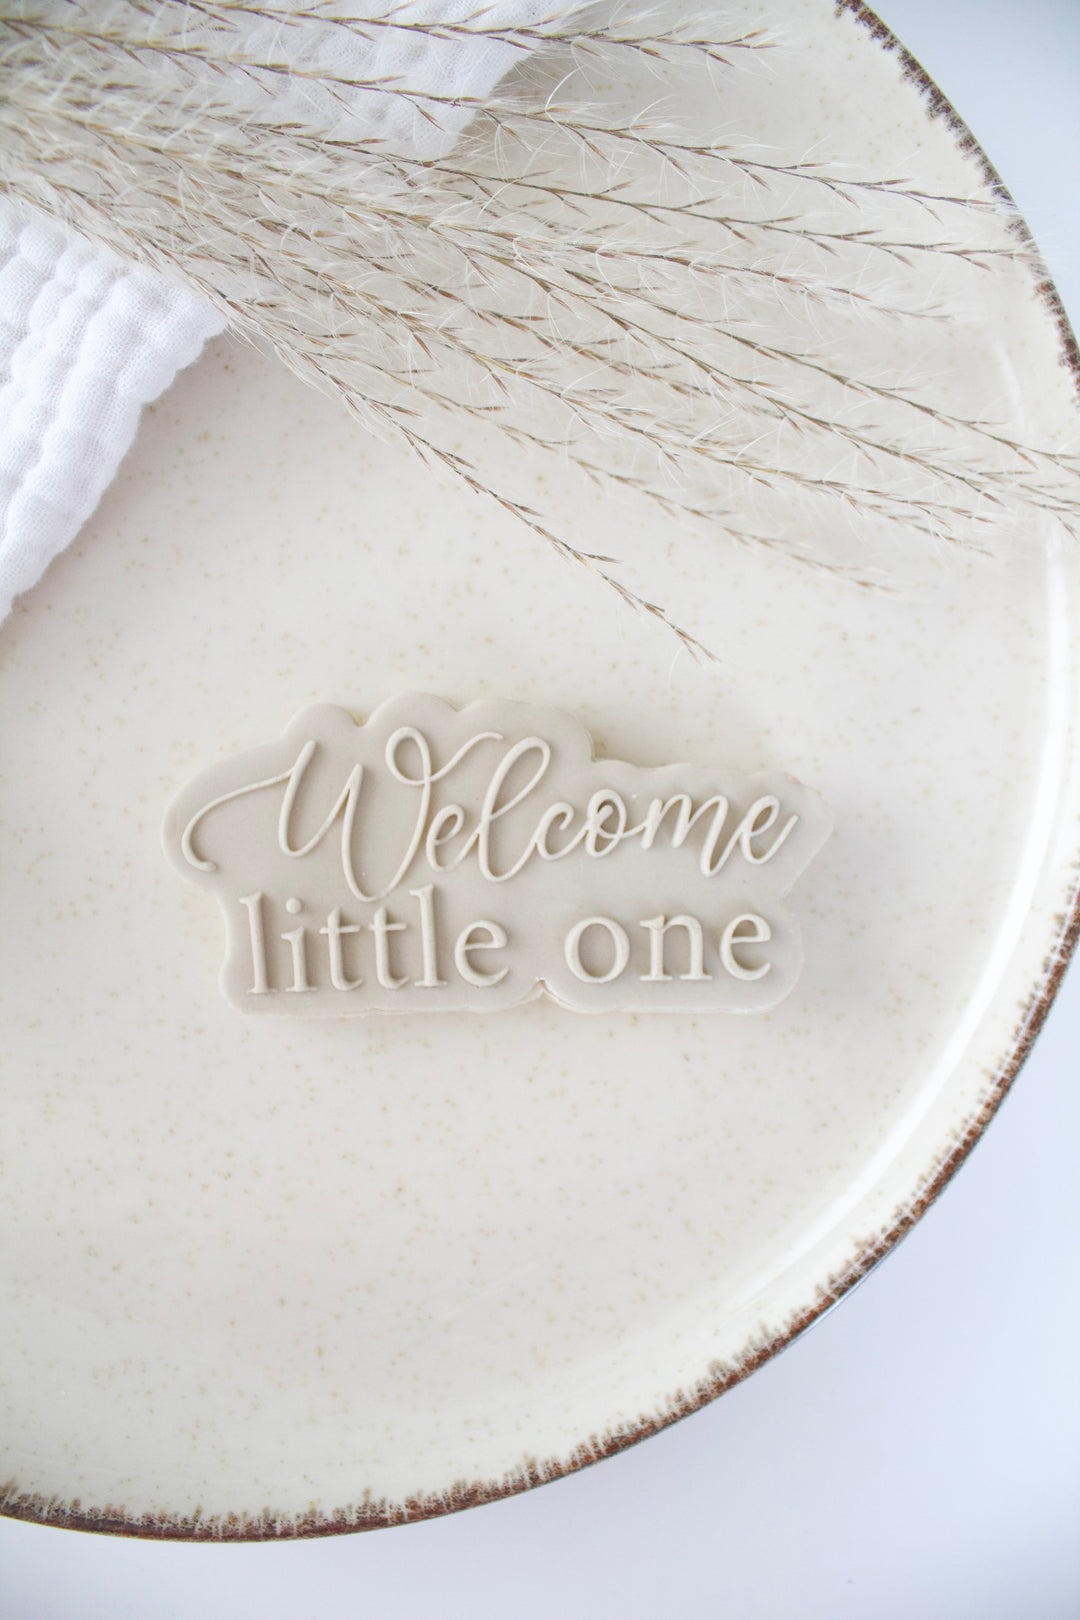 Welcome little one + emporte-pièce